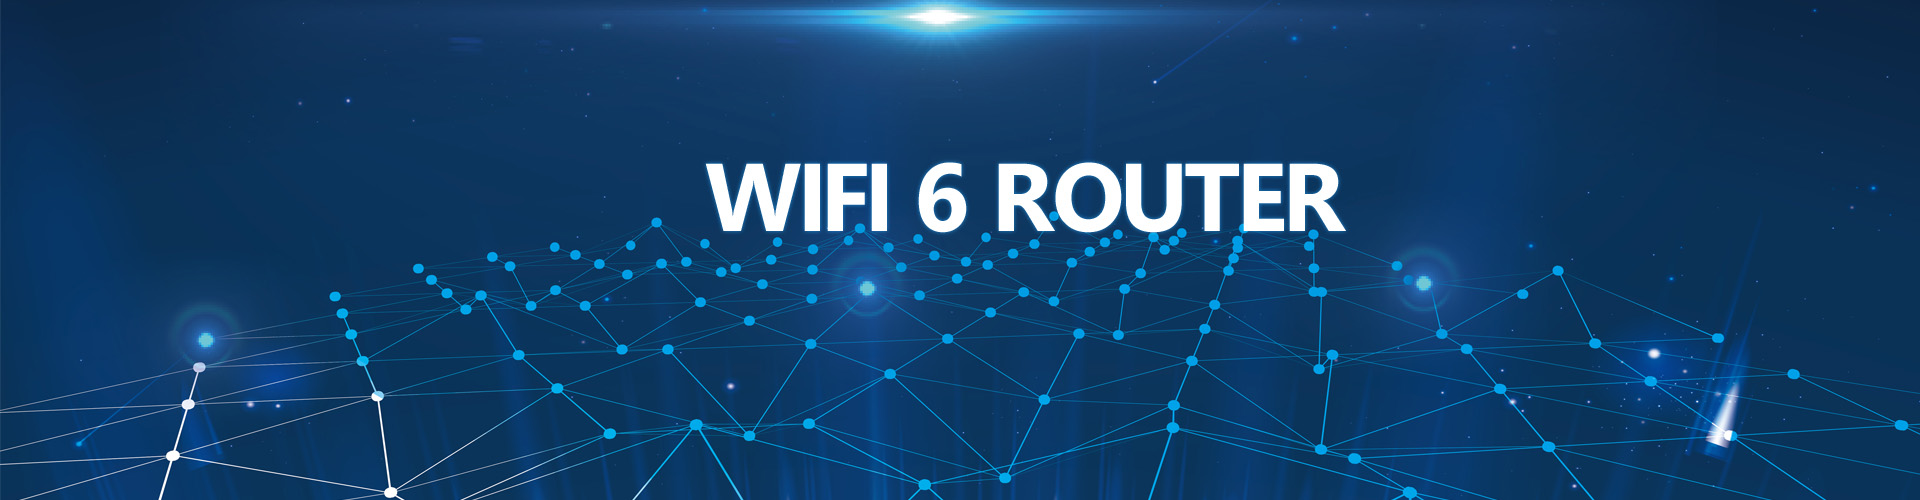 ROUTER WIFI6